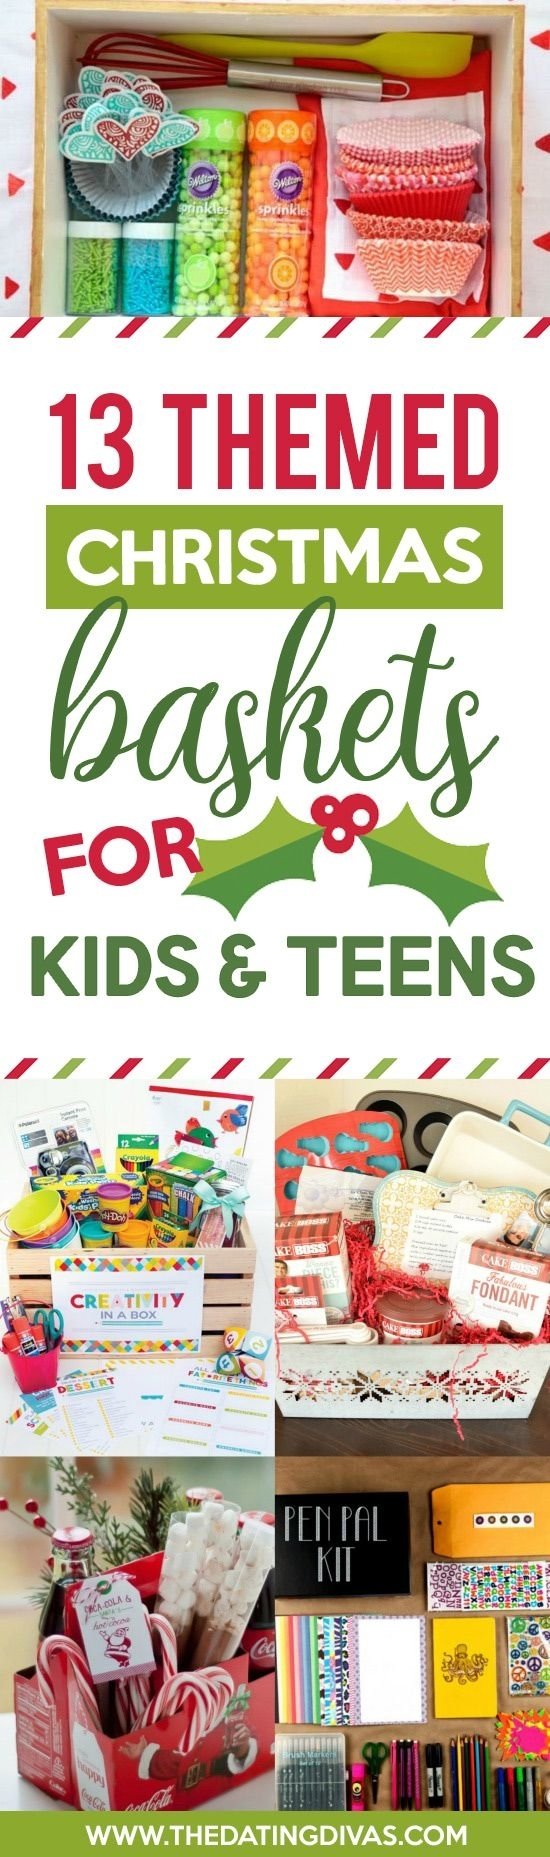 10 Lovely Christmas Party Ideas For Teenagers 50 themed christmas basket ideas christmas gifts teen and gift 2022